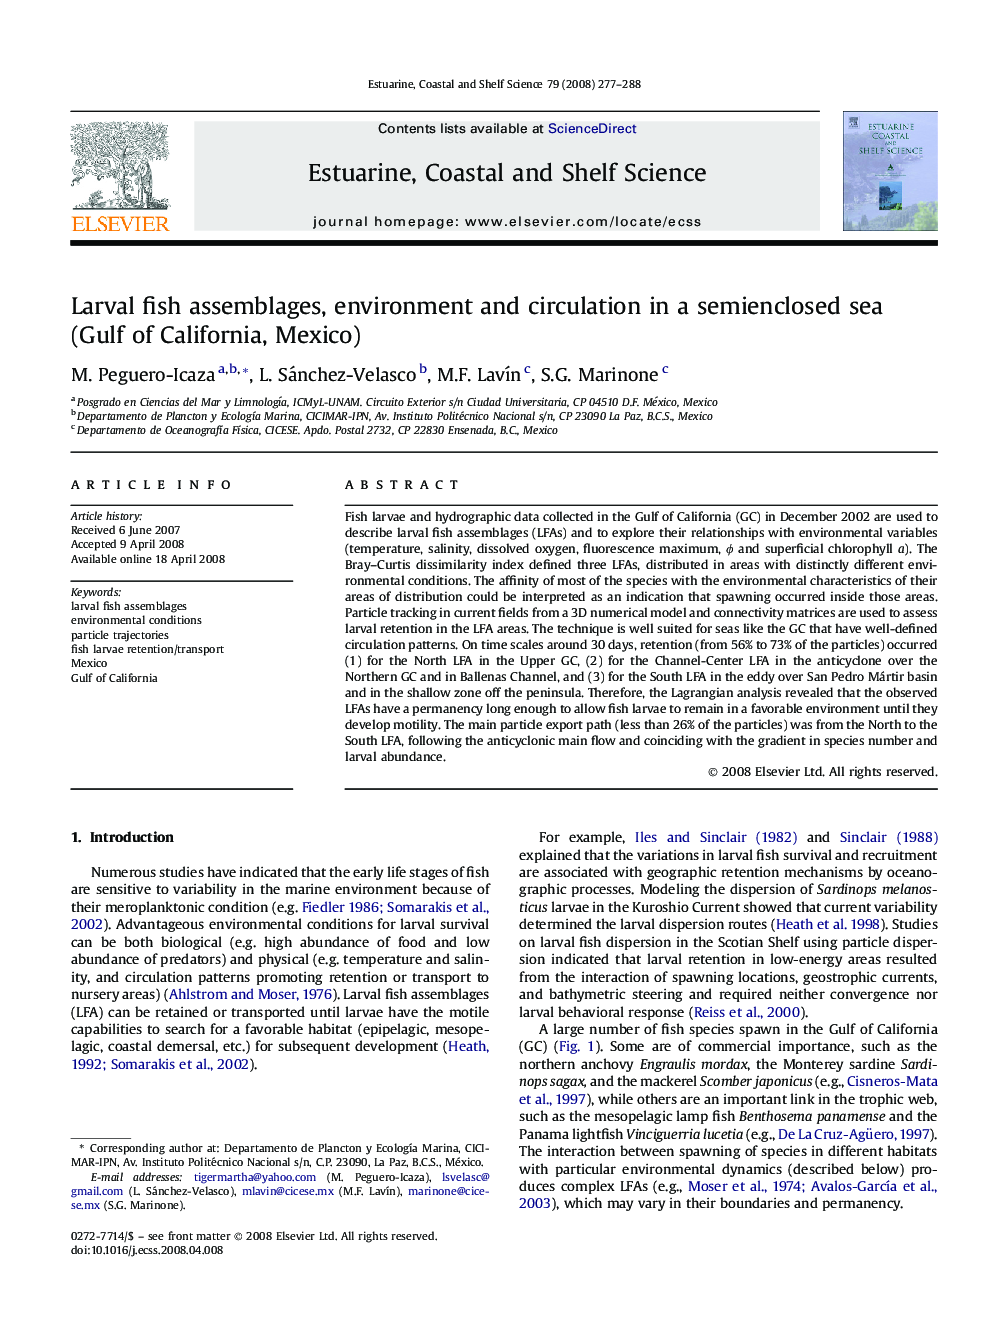 Larval fish assemblages, environment and circulation in a semienclosed sea (Gulf of California, Mexico)